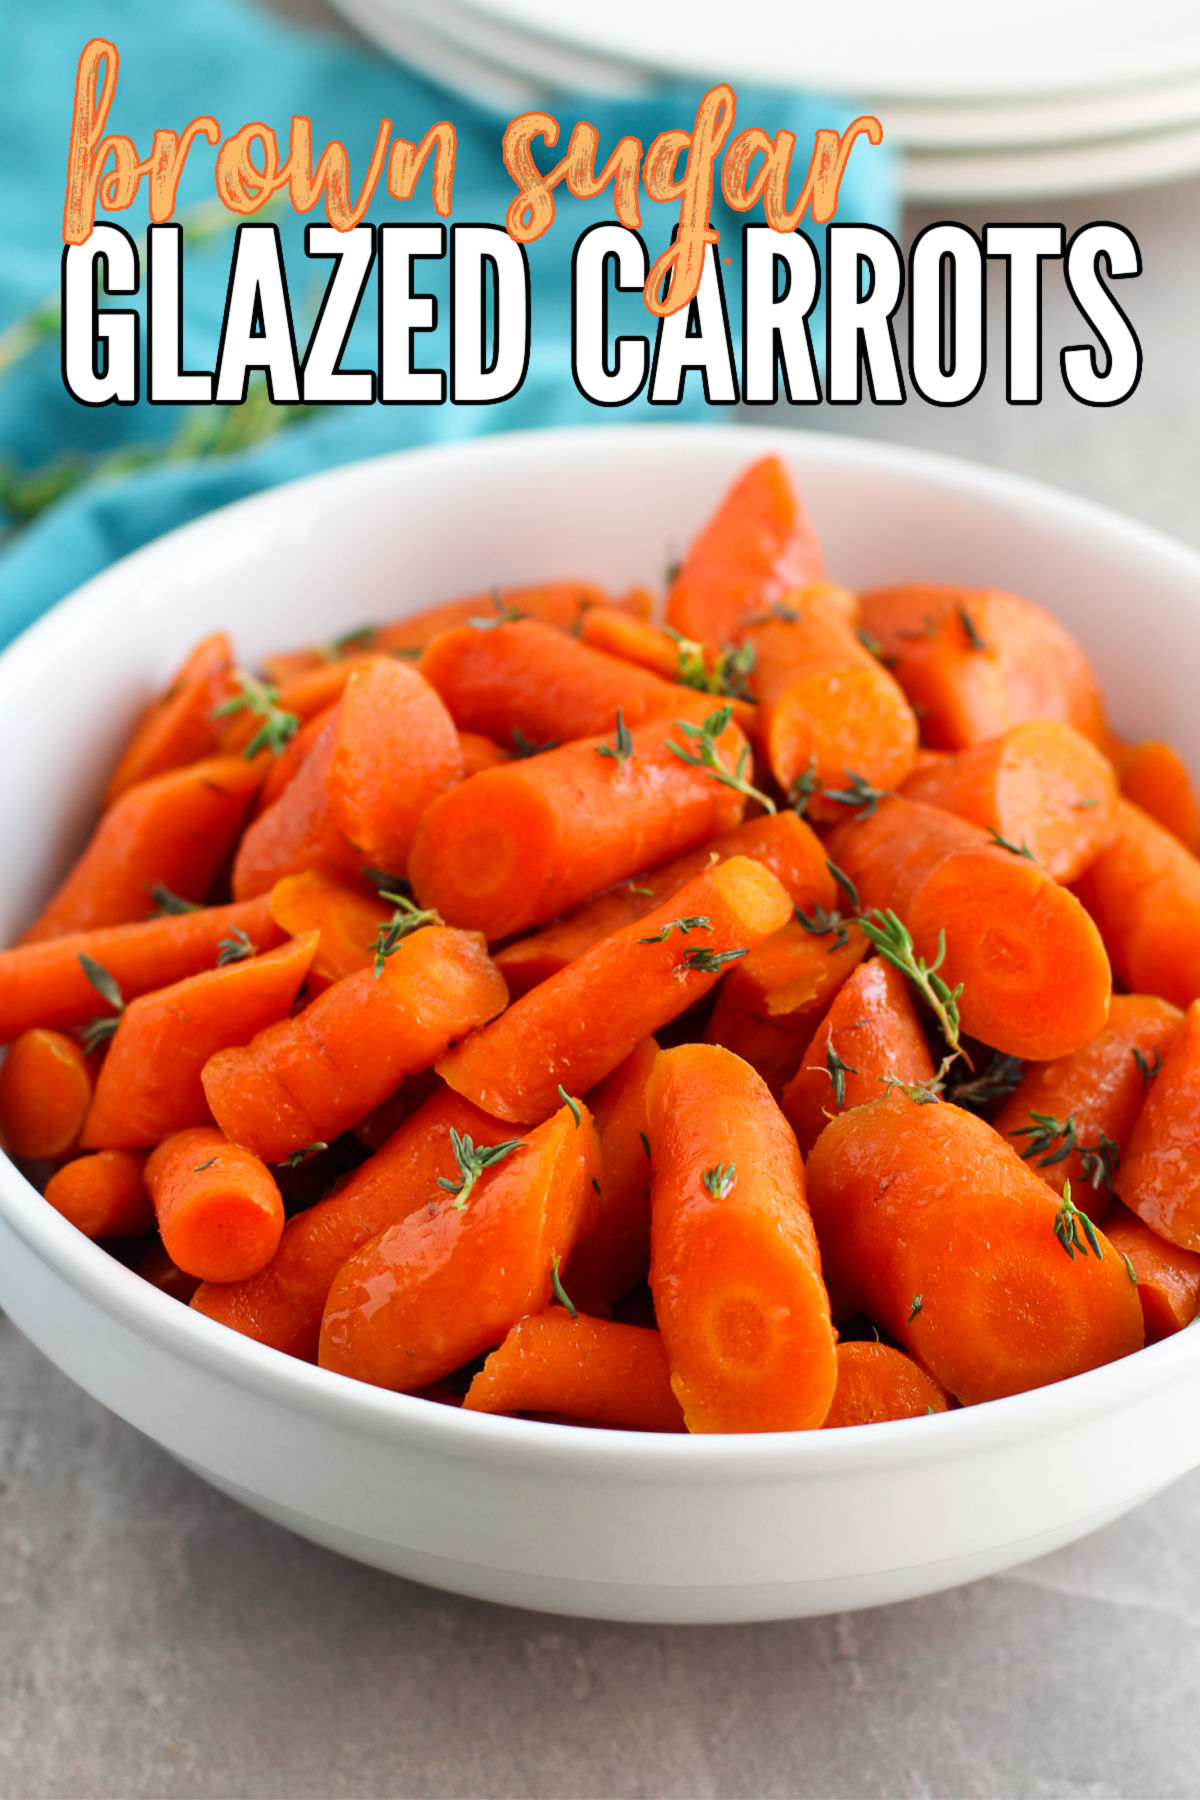 Brown Sugar Glazed Carrots in a white bowl with a blue tea towel on the side